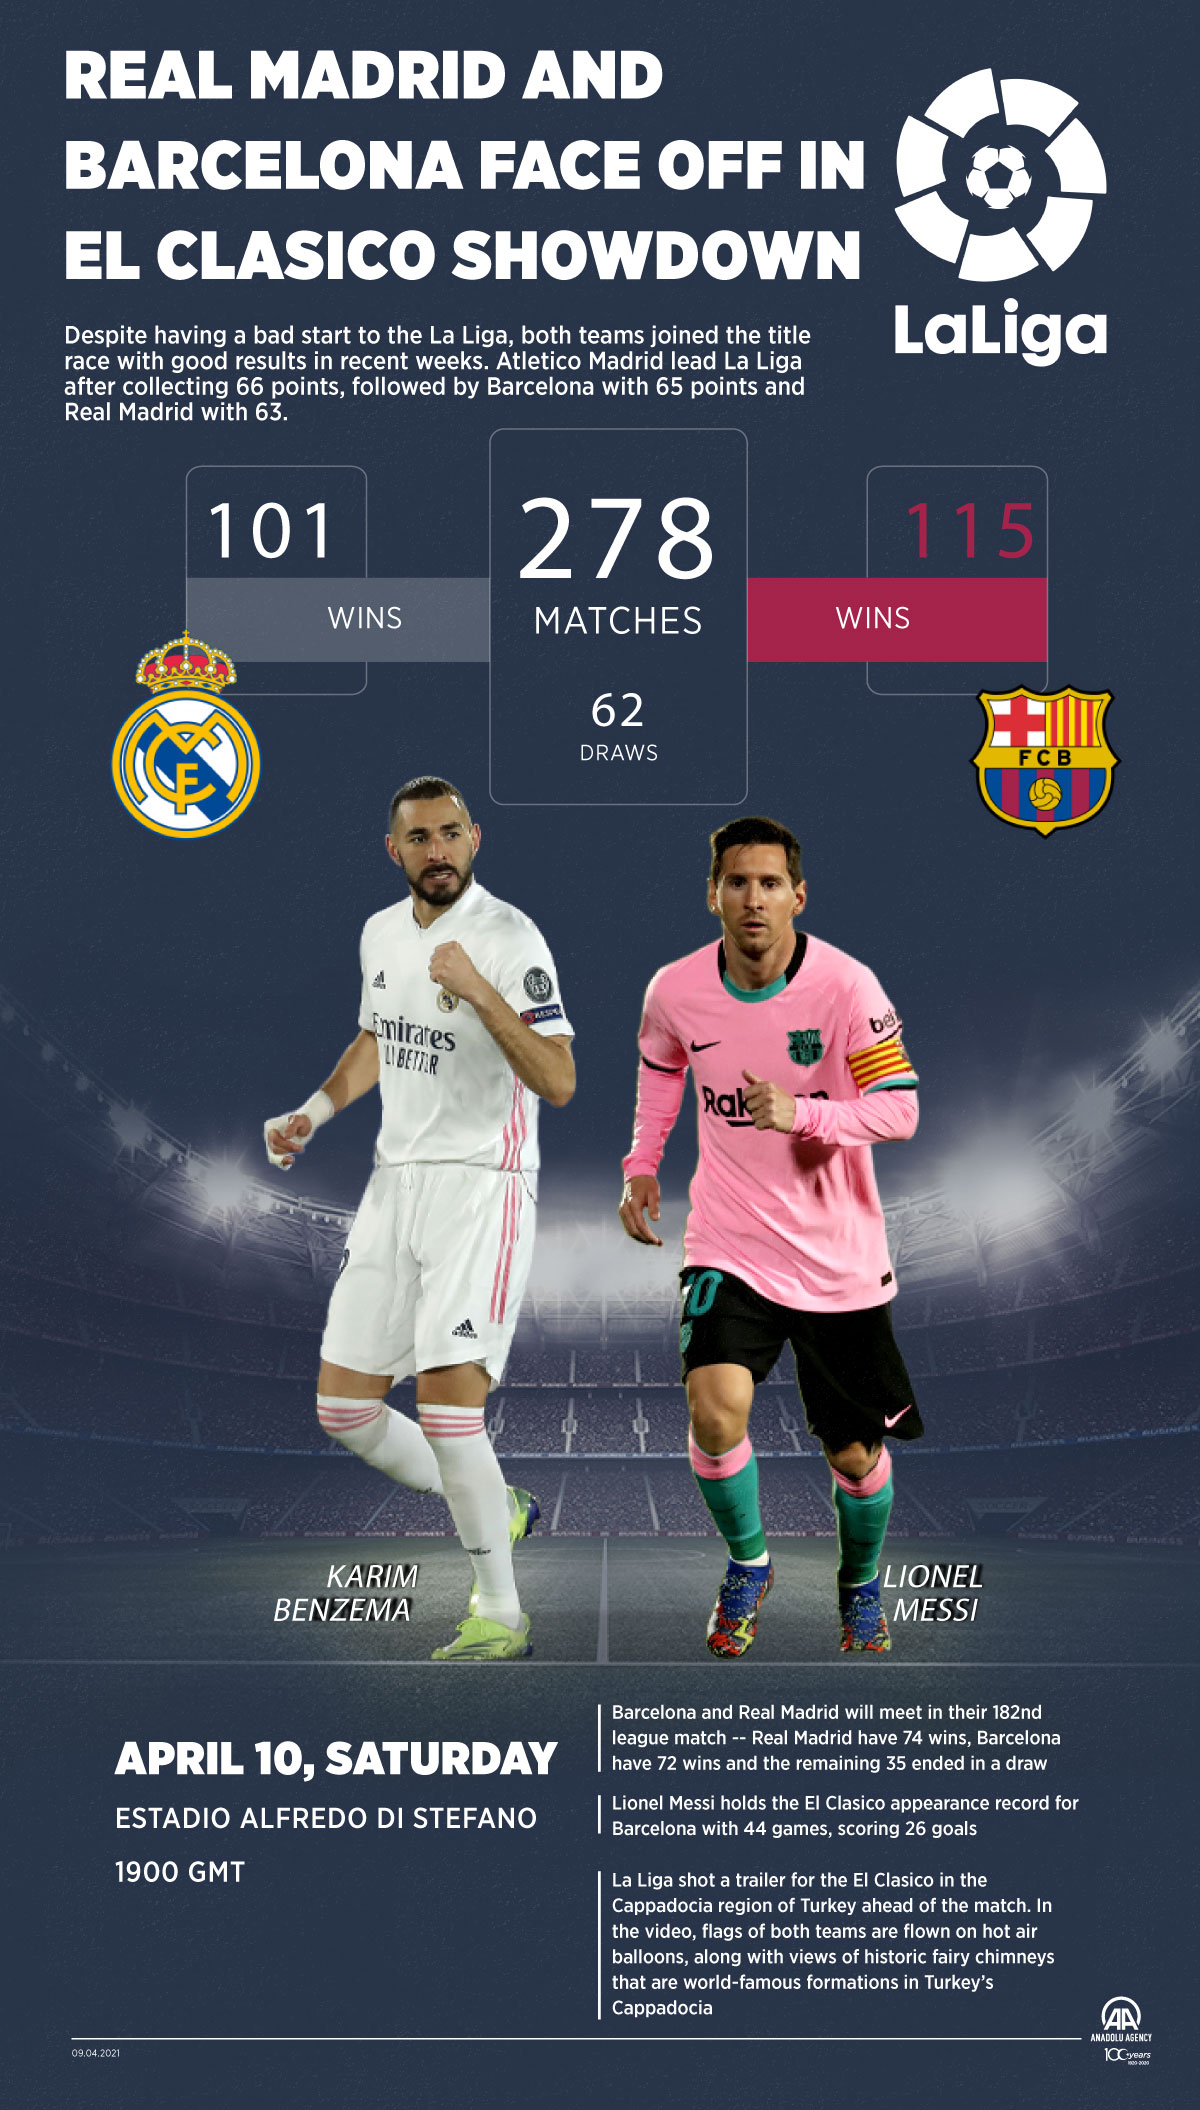 Real Madrid and Barcelona face off in El Classico showdown